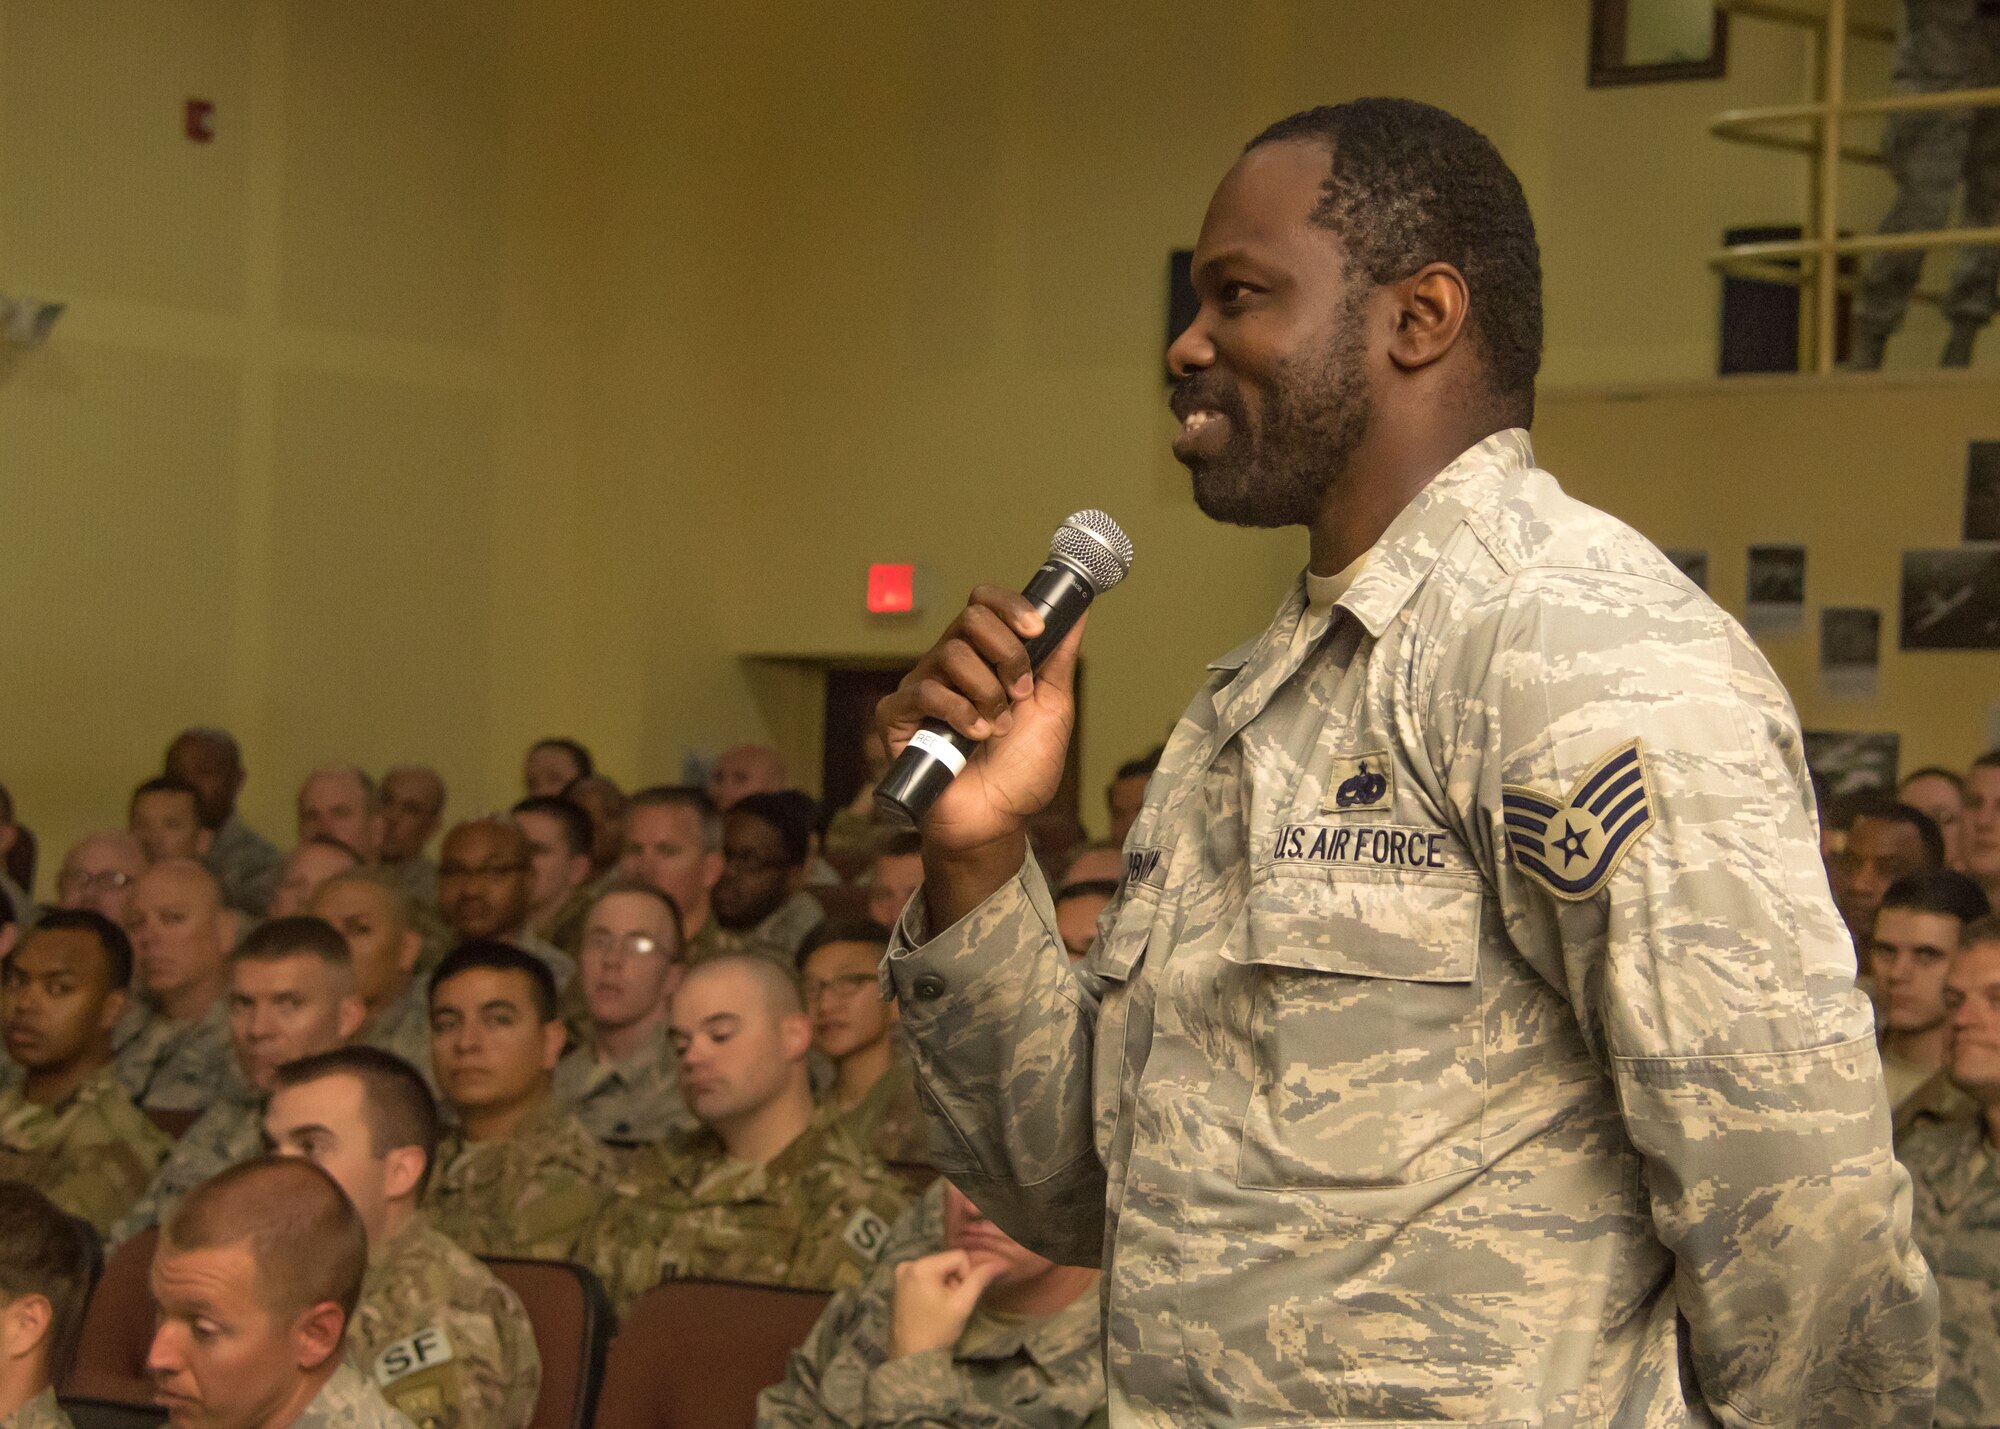 An Airman asks a question during the all call led by the Vice Chief of Staff of the U.S. Air Force and Chief Master Sergeant of the Air Force at an undisclosed location in Southwest Asia April 9, 2017. During the question and answer session, both Wilson and Wright addressed concerns ranging from the lack of certain services in forward-deployed locations to future possibilities for enlisted members to fly unmanned aircraft. (U.S. Air Force photo/Staff Sgt. Andrew Park)